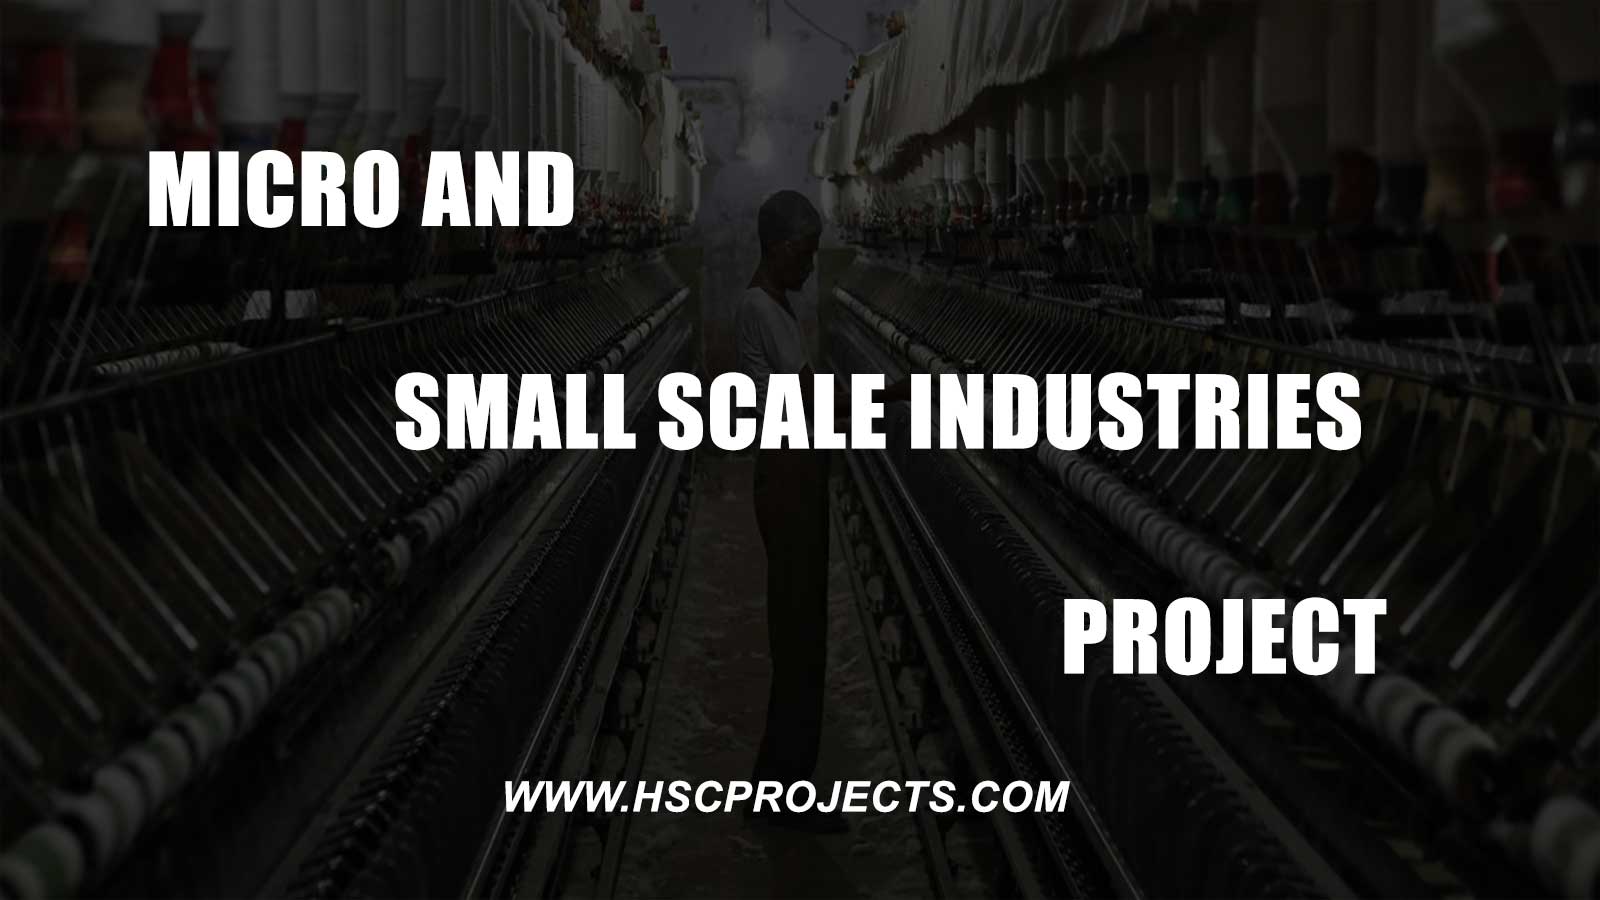 https://hscprojects.com/wp-content/uploads/2021/10/Micro-And-Small-Scale-Industries.jpg